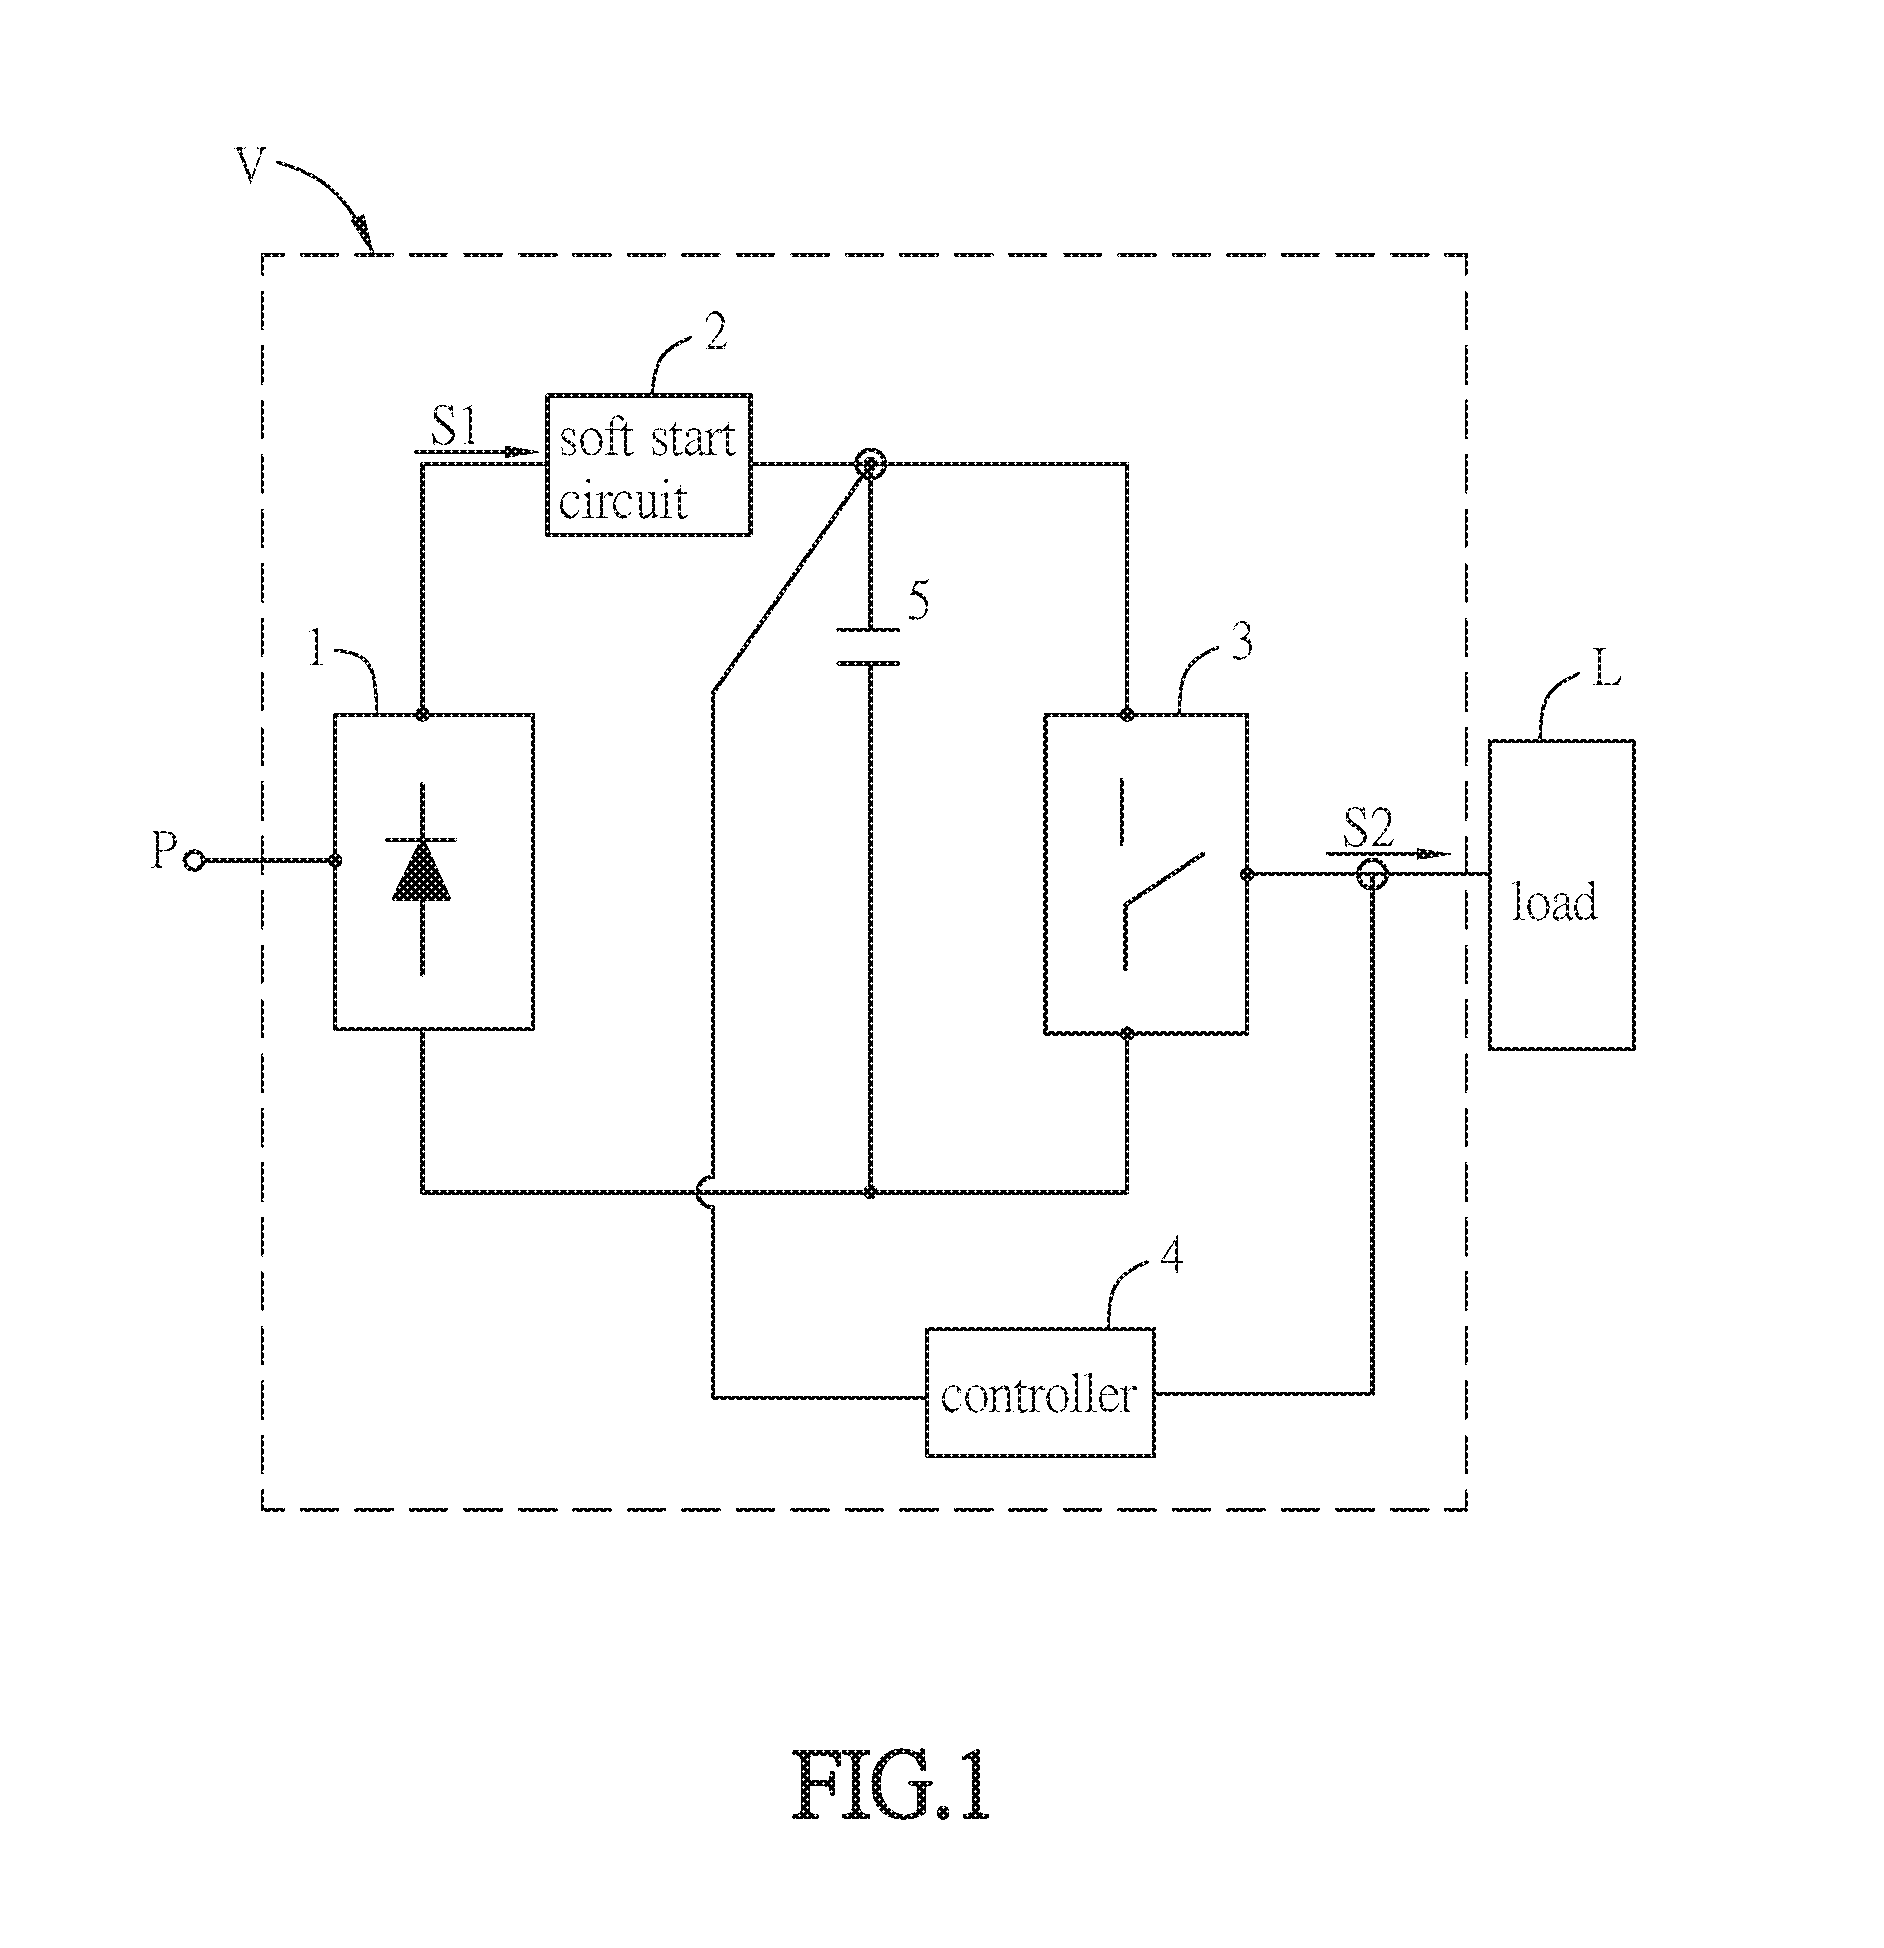 Method for detecting failure of soft start and variable frequency device